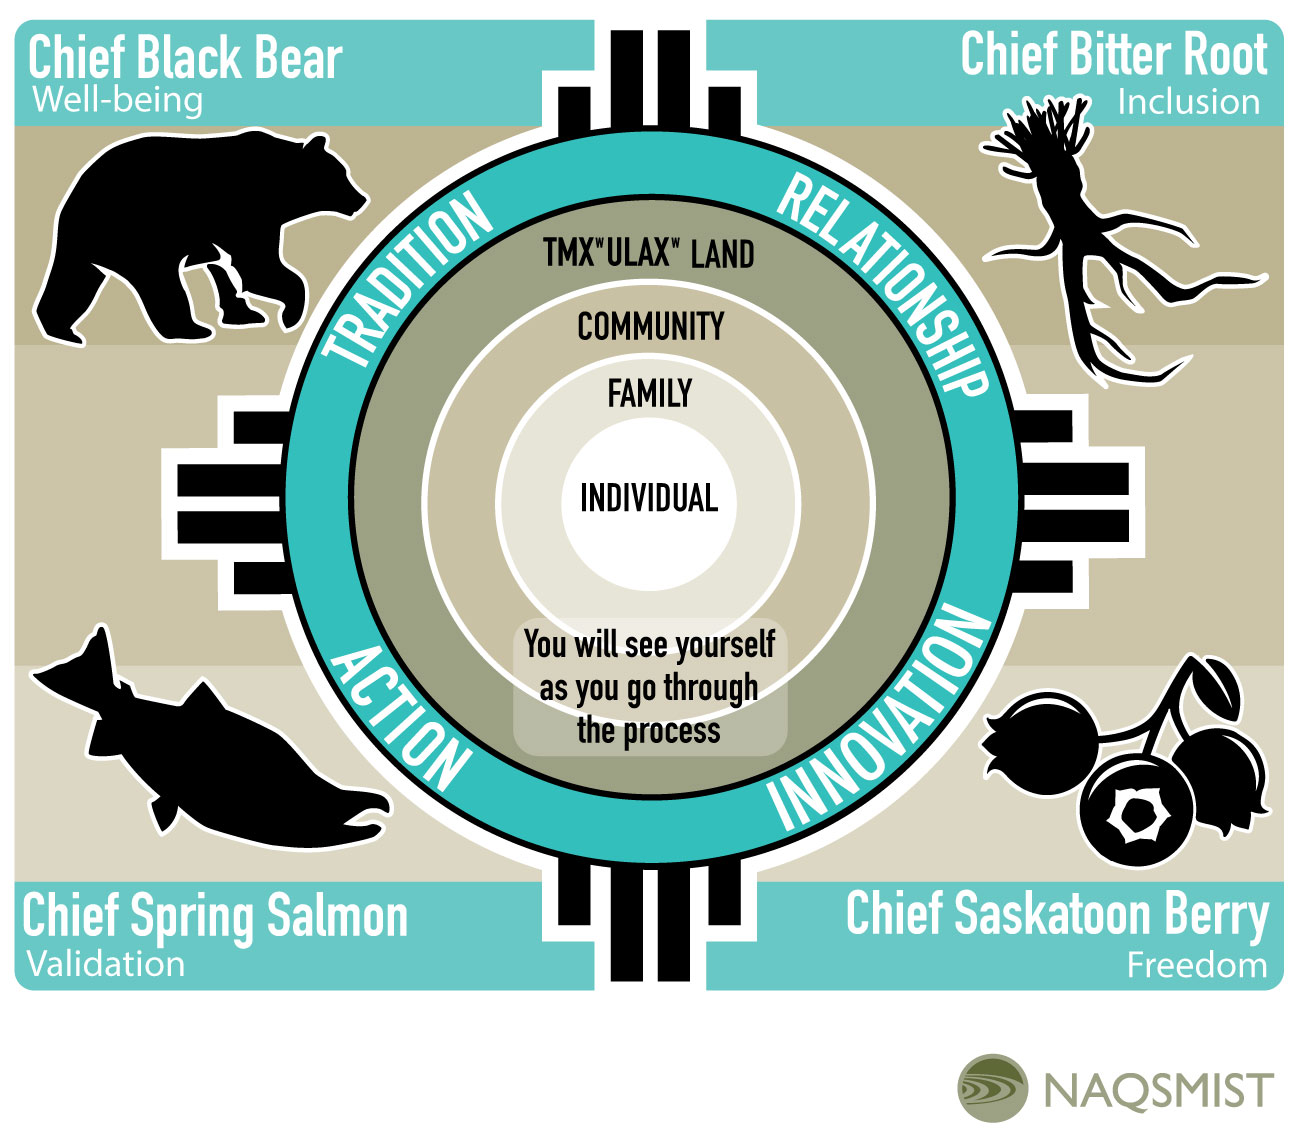 Naqsmist Engagement graphic. Description: a wheel with Tradition, Relationship, Action, and Innovation. Four corners or pillars include Chief Black Bear representing well-being, Chief Bitter Root representing inclusion, Chief Spring Salmon representing validation, and Chief Saskatoon Berry representing freedom. "You will see yourself as you go through the process" is written over a stepped circle with the individual being in the center, then family, community, and land in the following steps inside that circle.